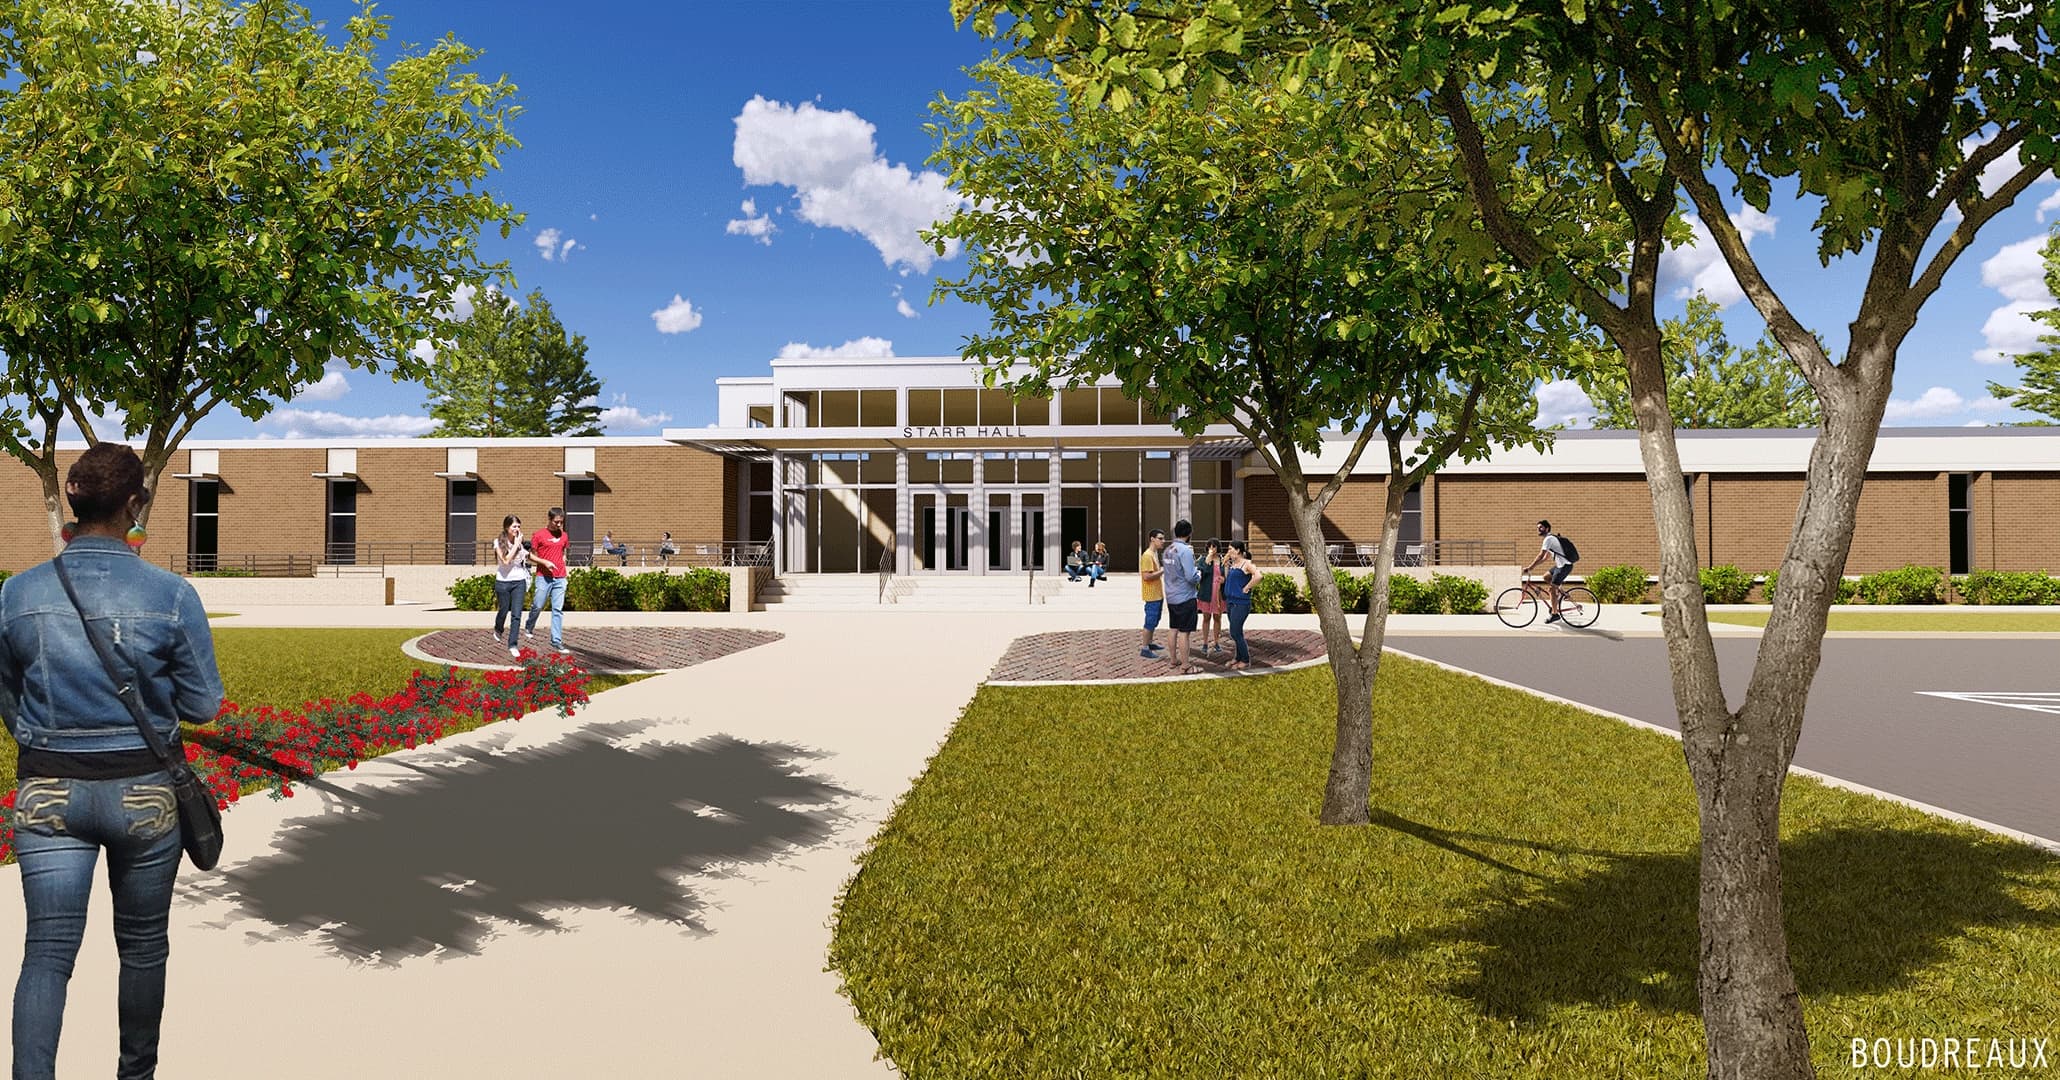 Boudreaux architects and master planners designed a new student experience at Starr Hall.